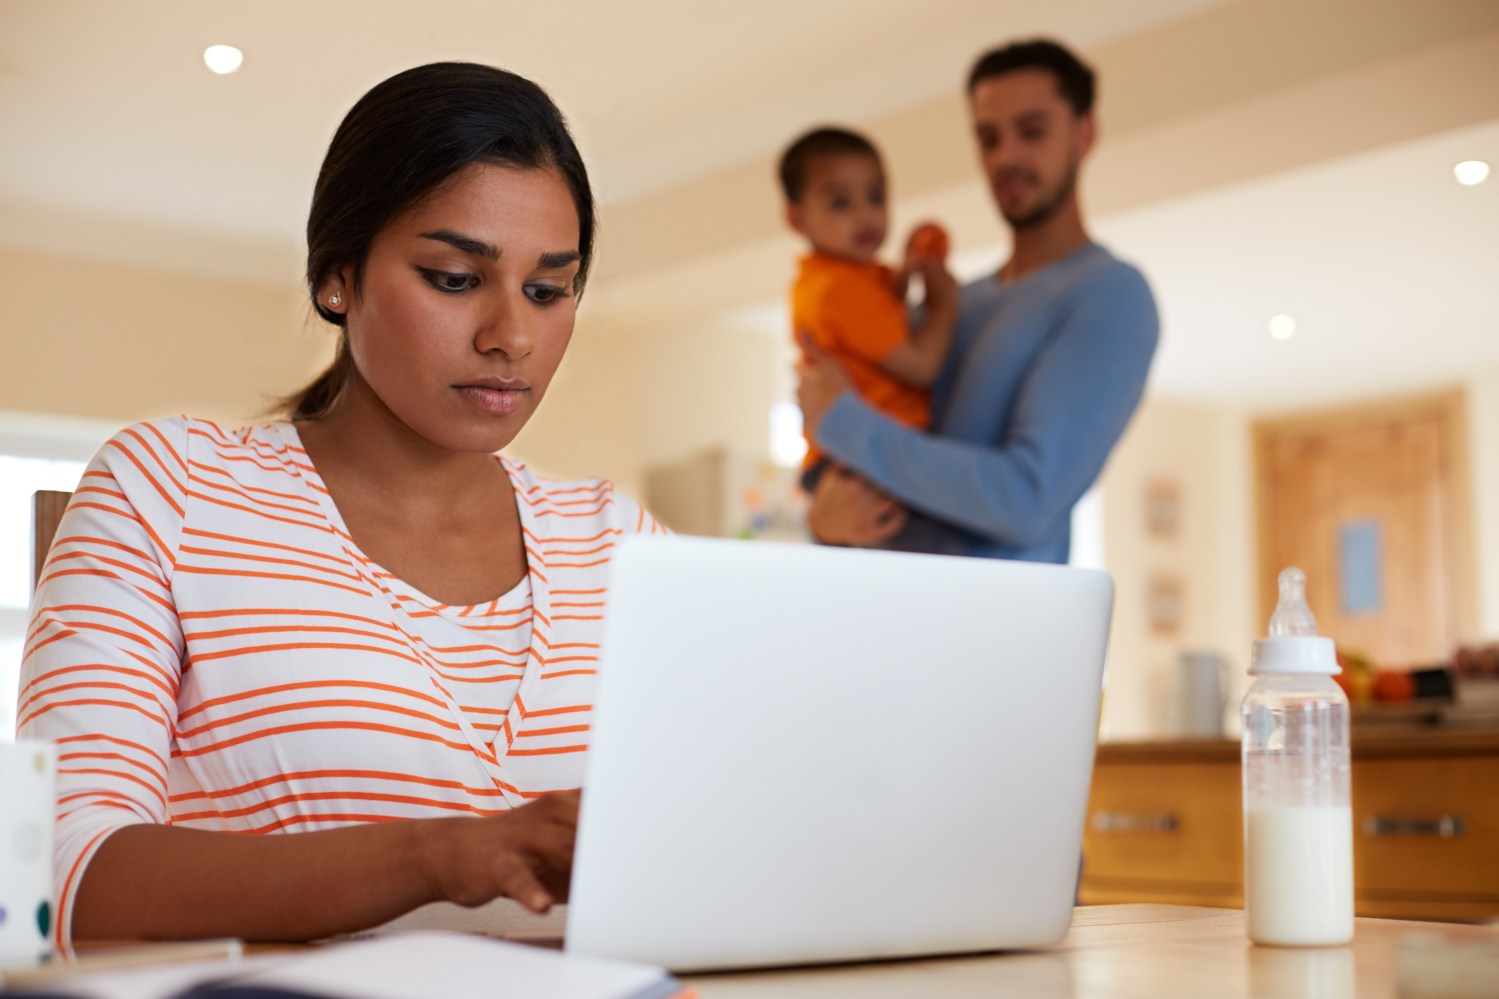 Woman working at her laptop with husband and child in the background.